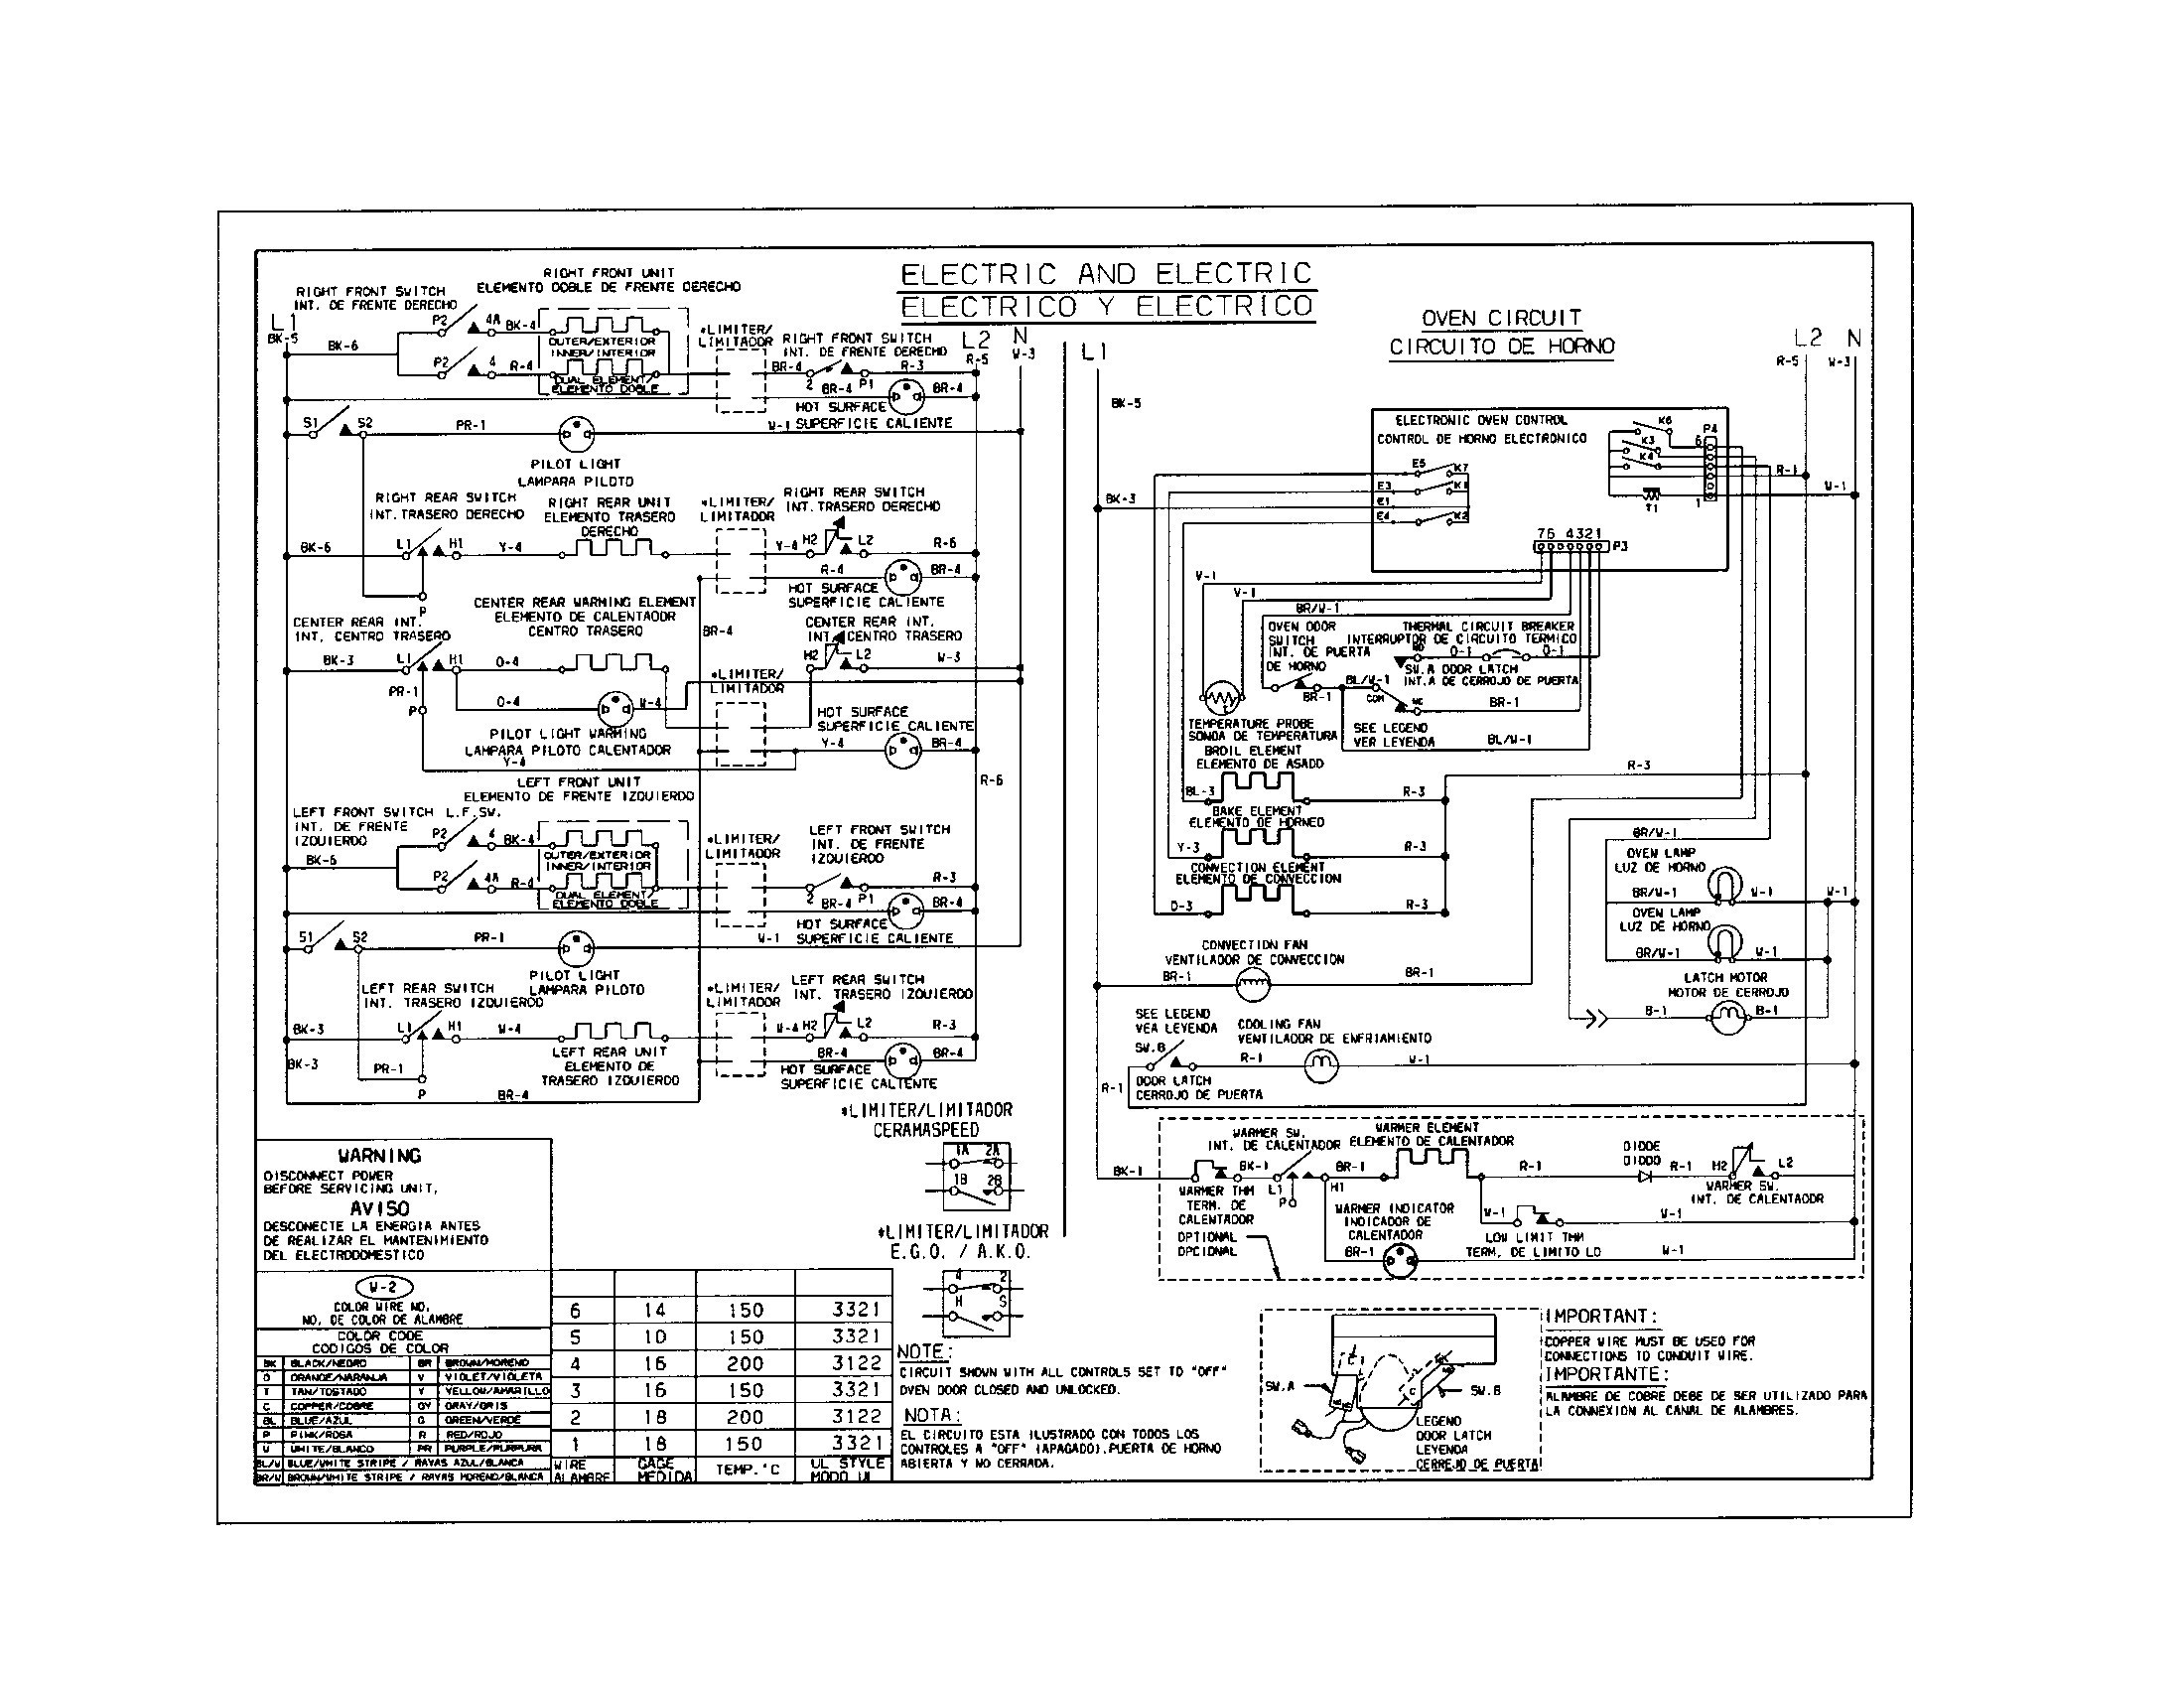 Wiring Diagram for Electric Stove New Inspirational Electric Stove Wiring Diagram Wiring